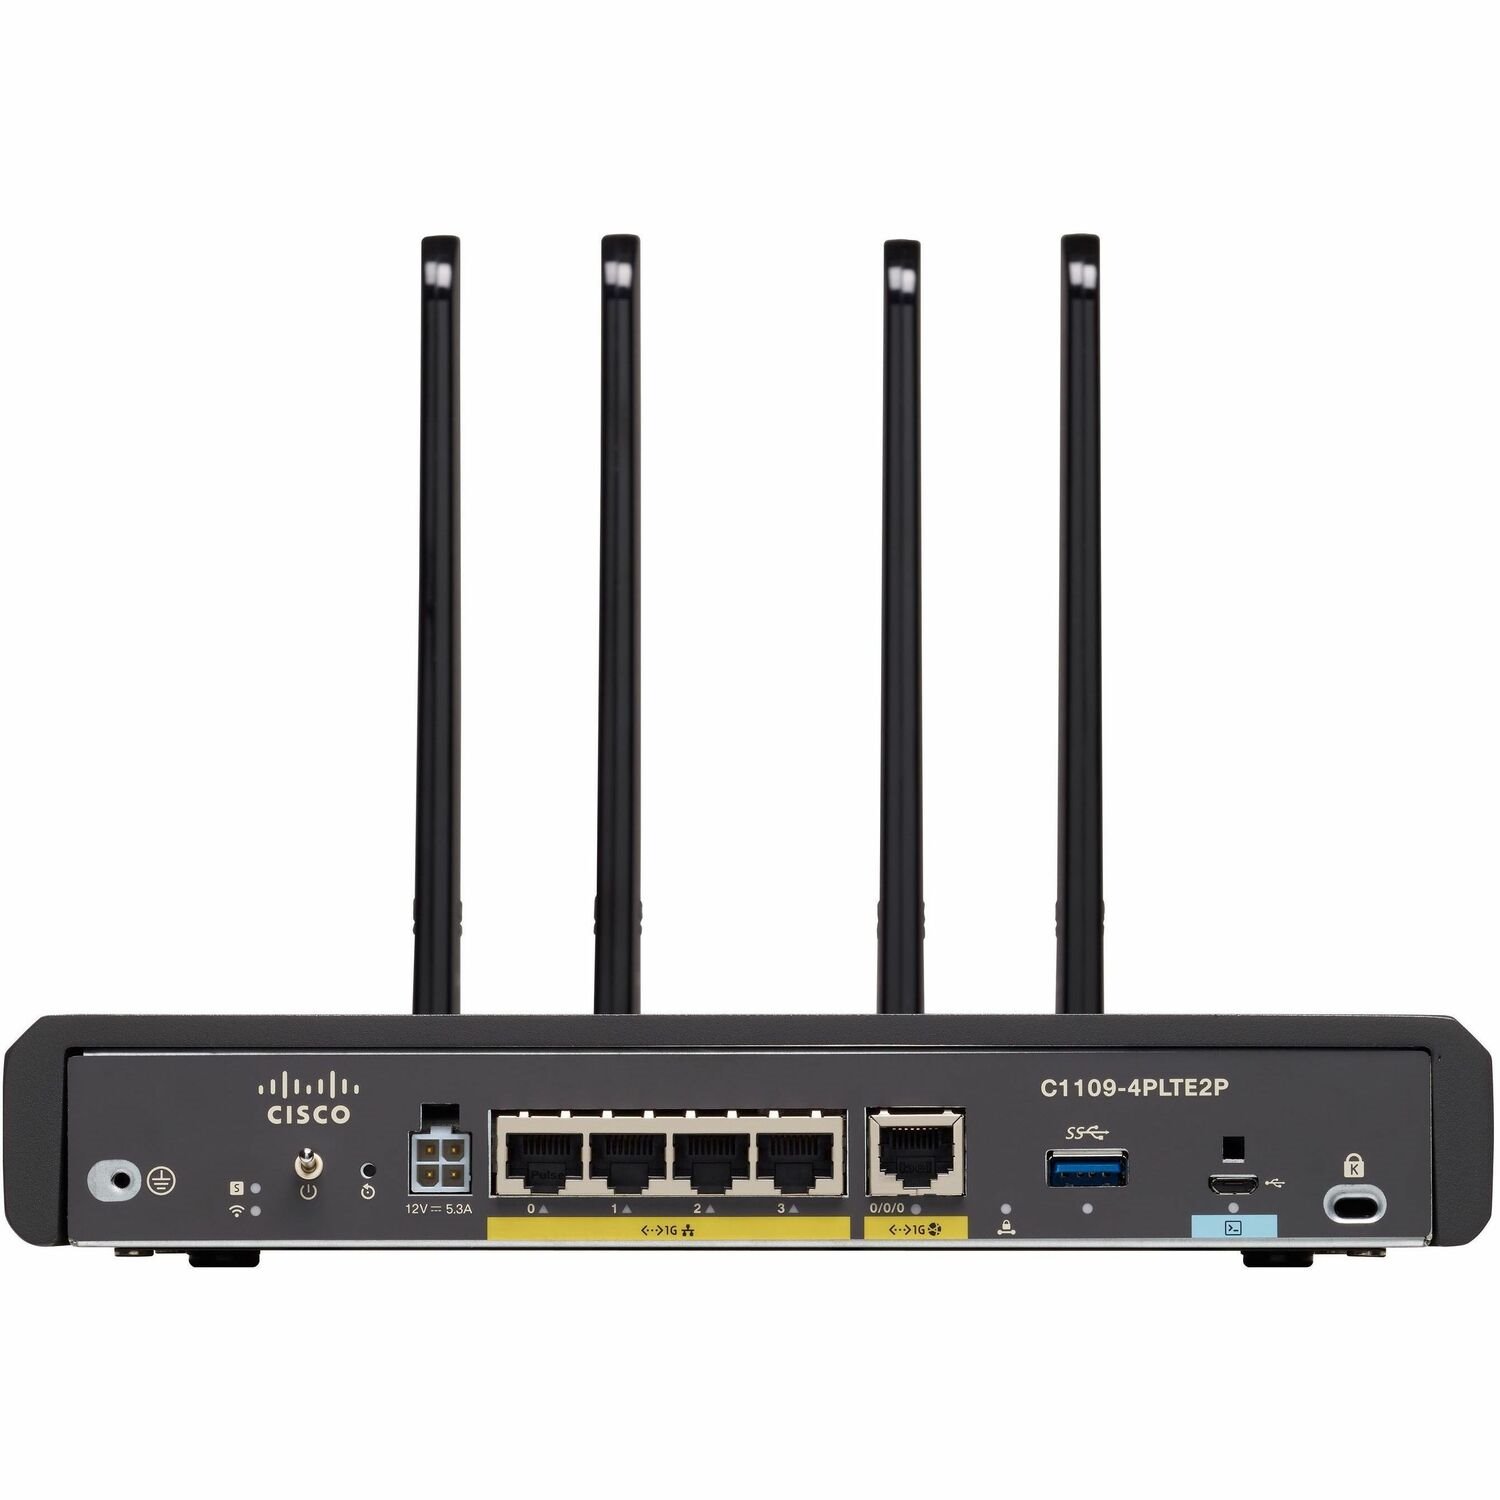 Cisco 1109 Ethernet Wireless Integrated Services Router